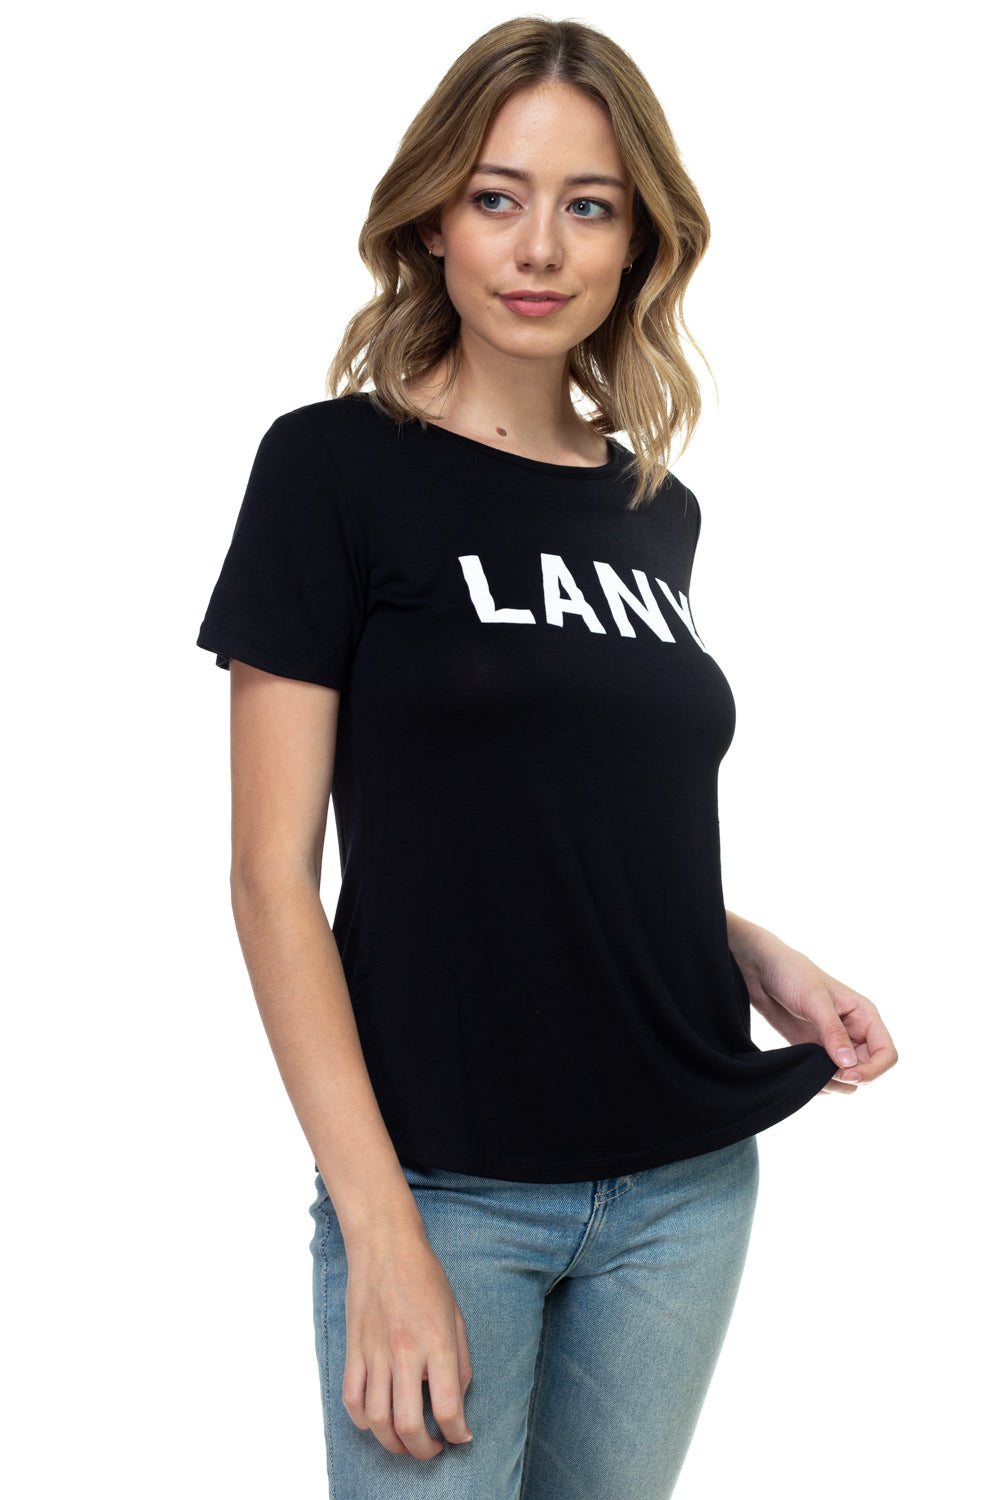 Strappy Back Tee - LANY